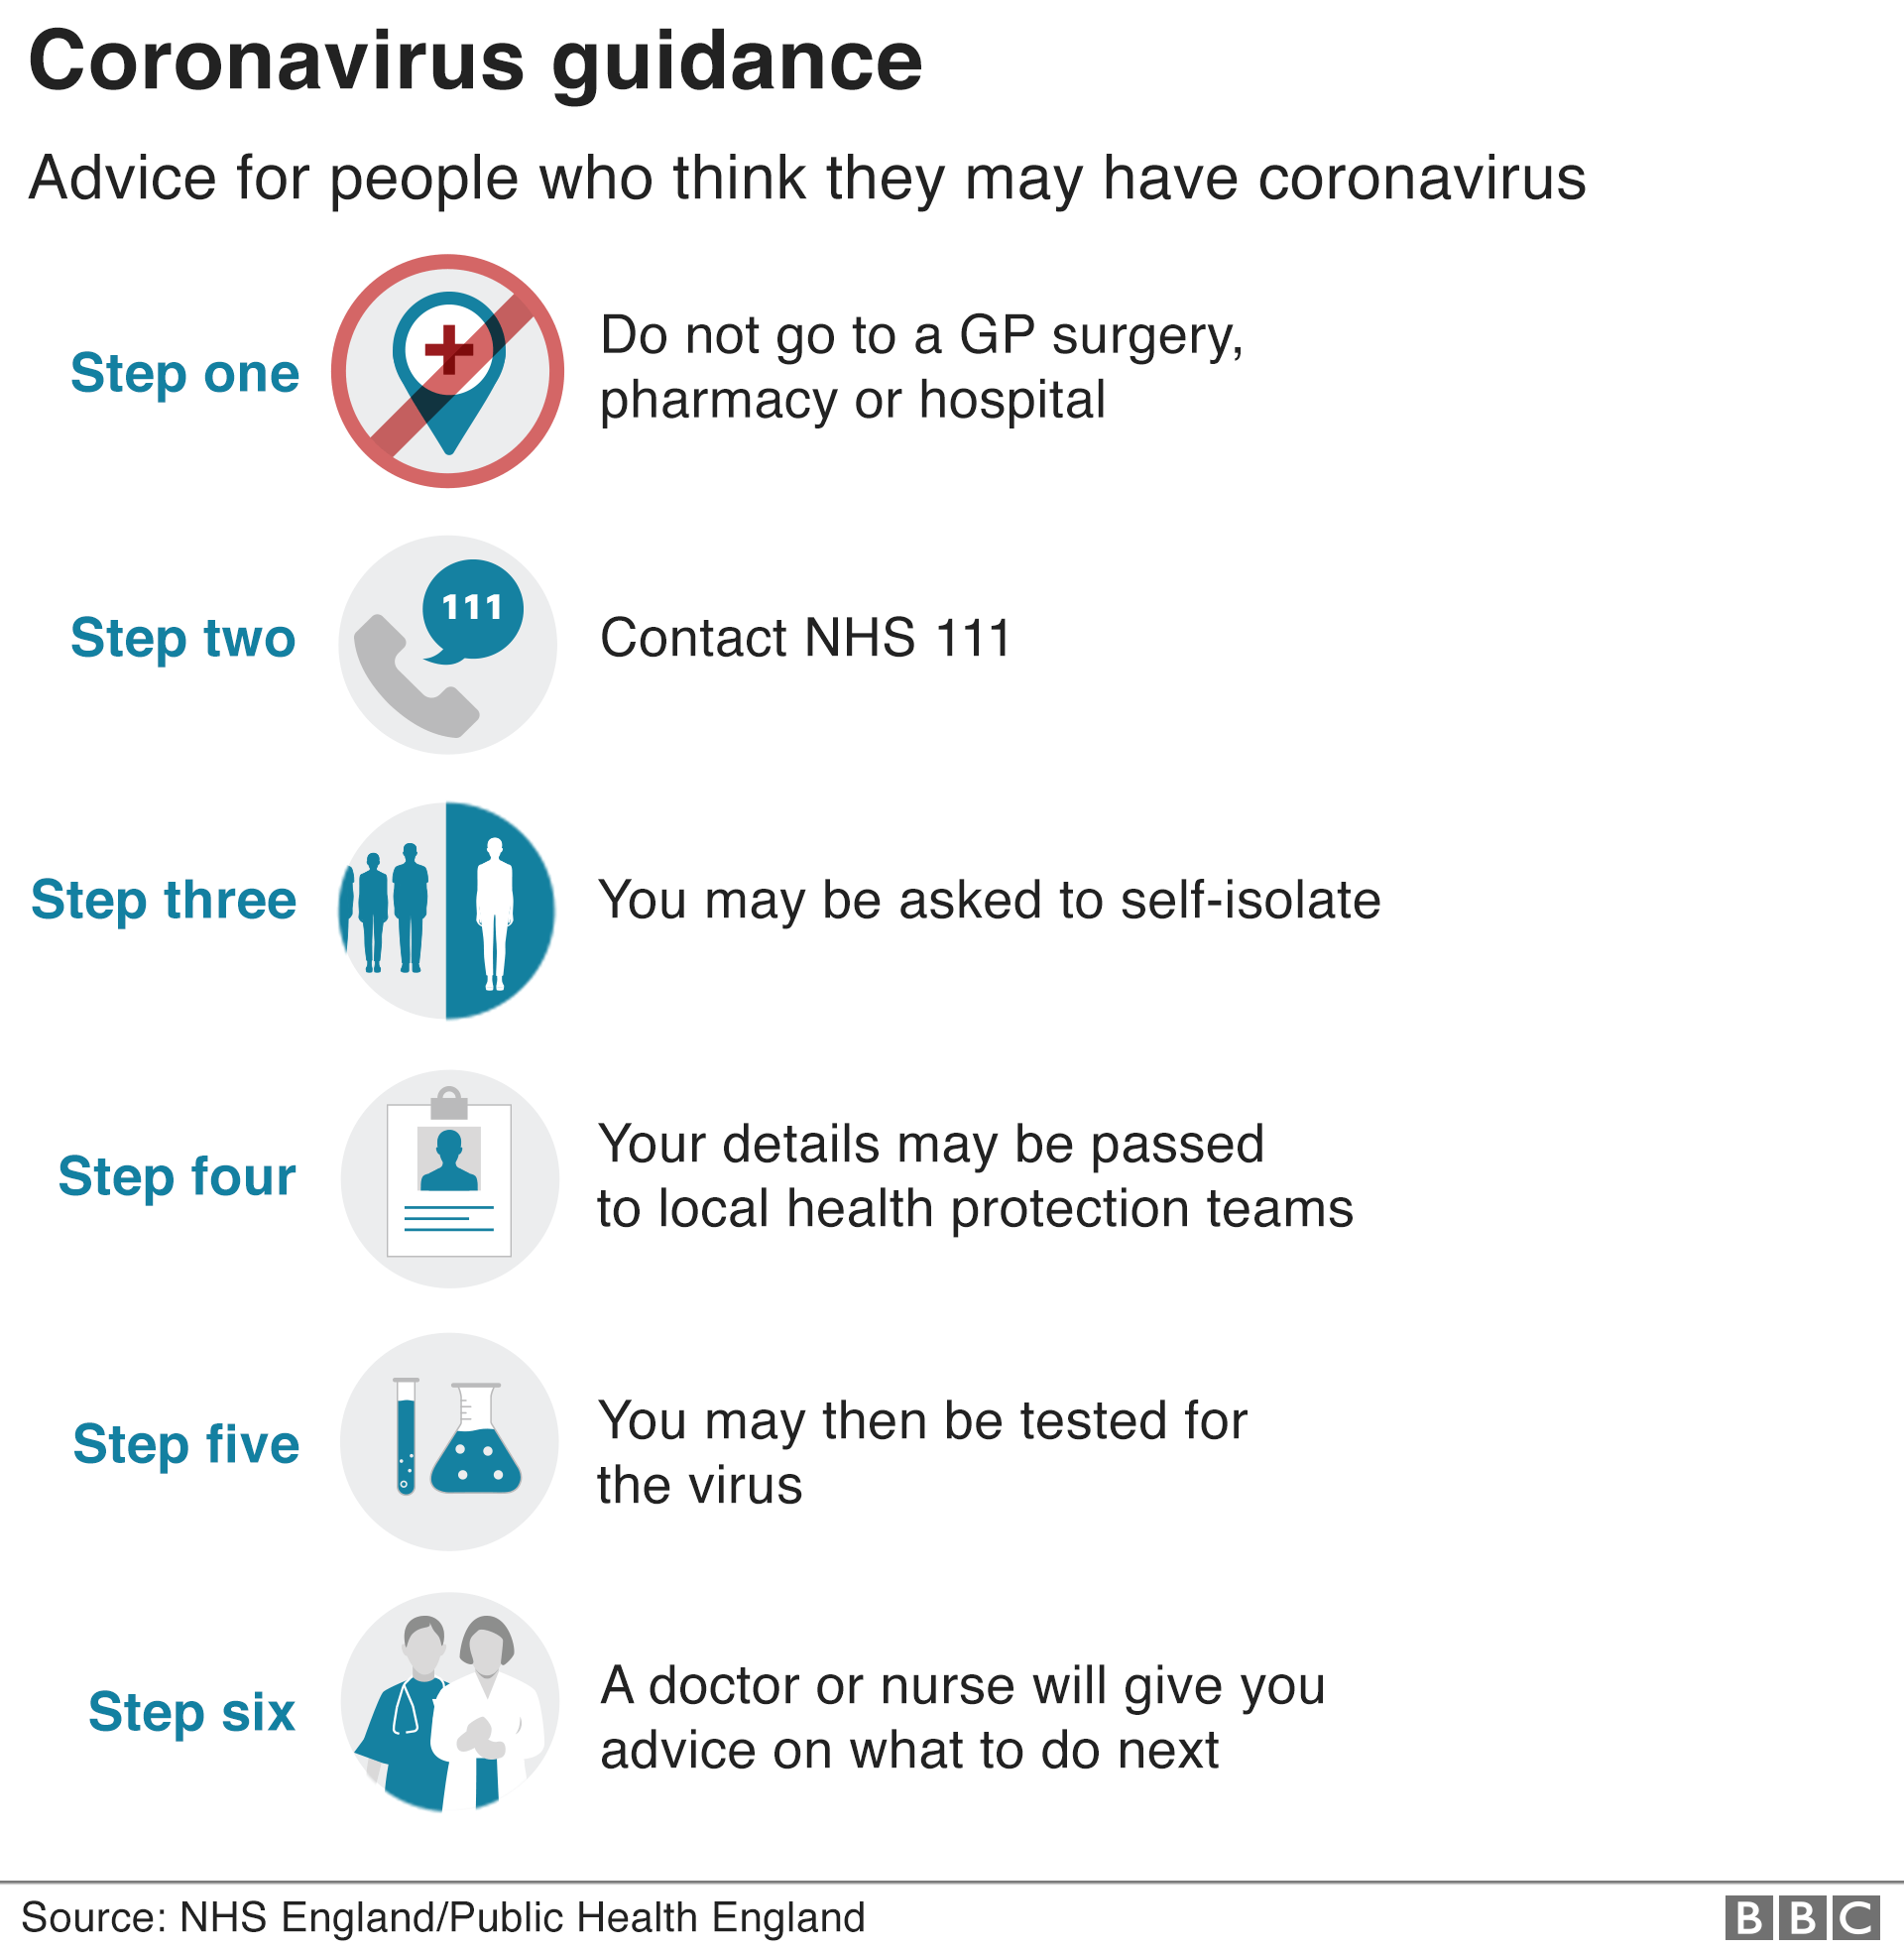 Graphic explaining the advice for people who think they may have coronavirus: 1) Do not go to a GP surgery, pharmacy or hospital. 2) Contact NHS 111. 3) You may be asked to self-isolate. 4) Your details may be passed to local health protection teams. 5) You may then be tested for the virus. 6) A doctor or nurse will give advice on what to do next.